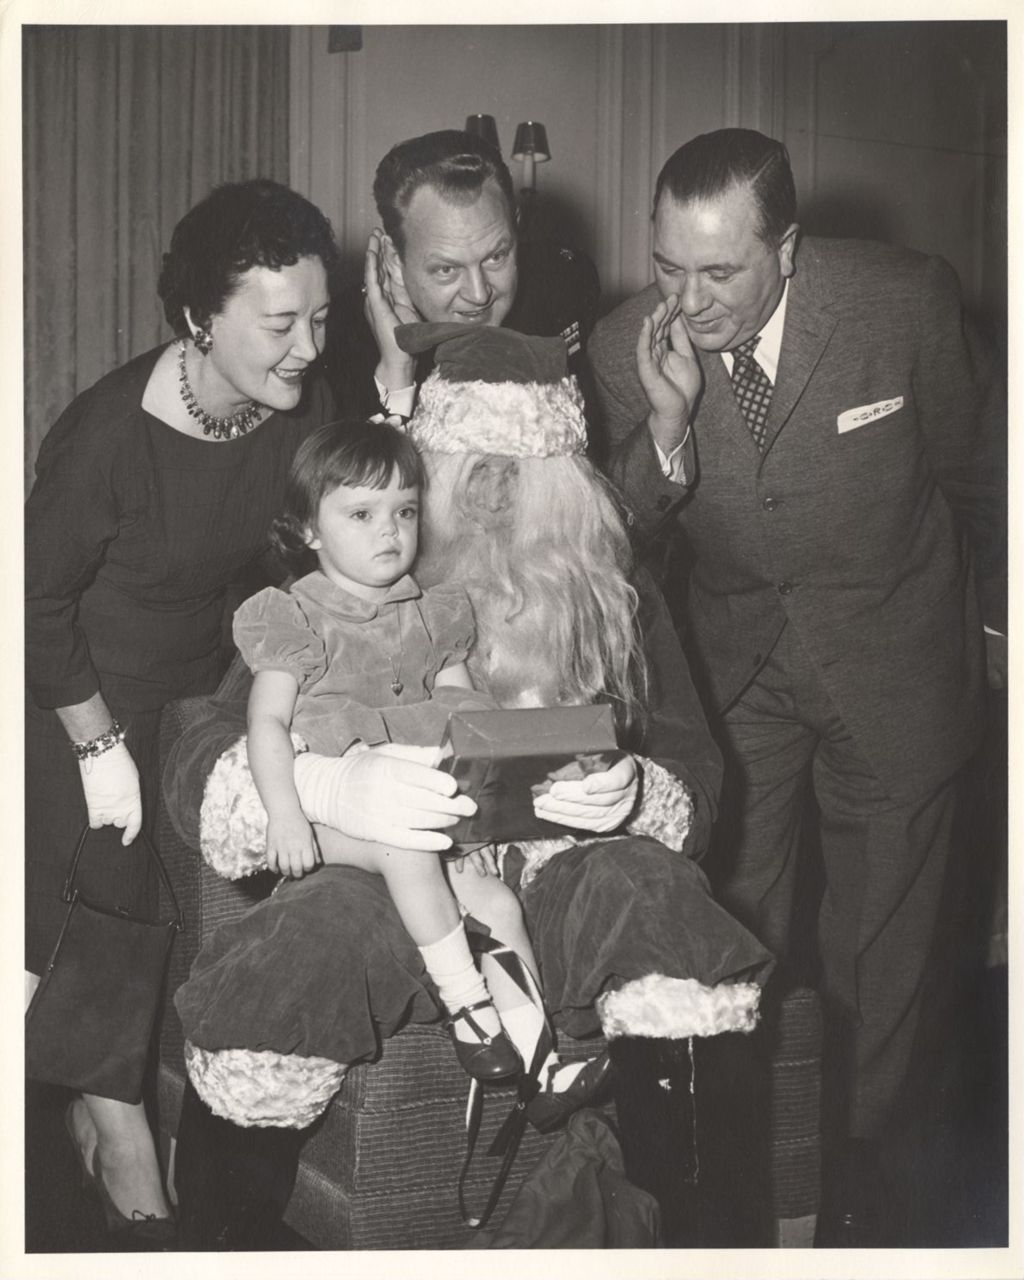 Miniature of Eleanor and Richard J. Daley with child visiting Santa